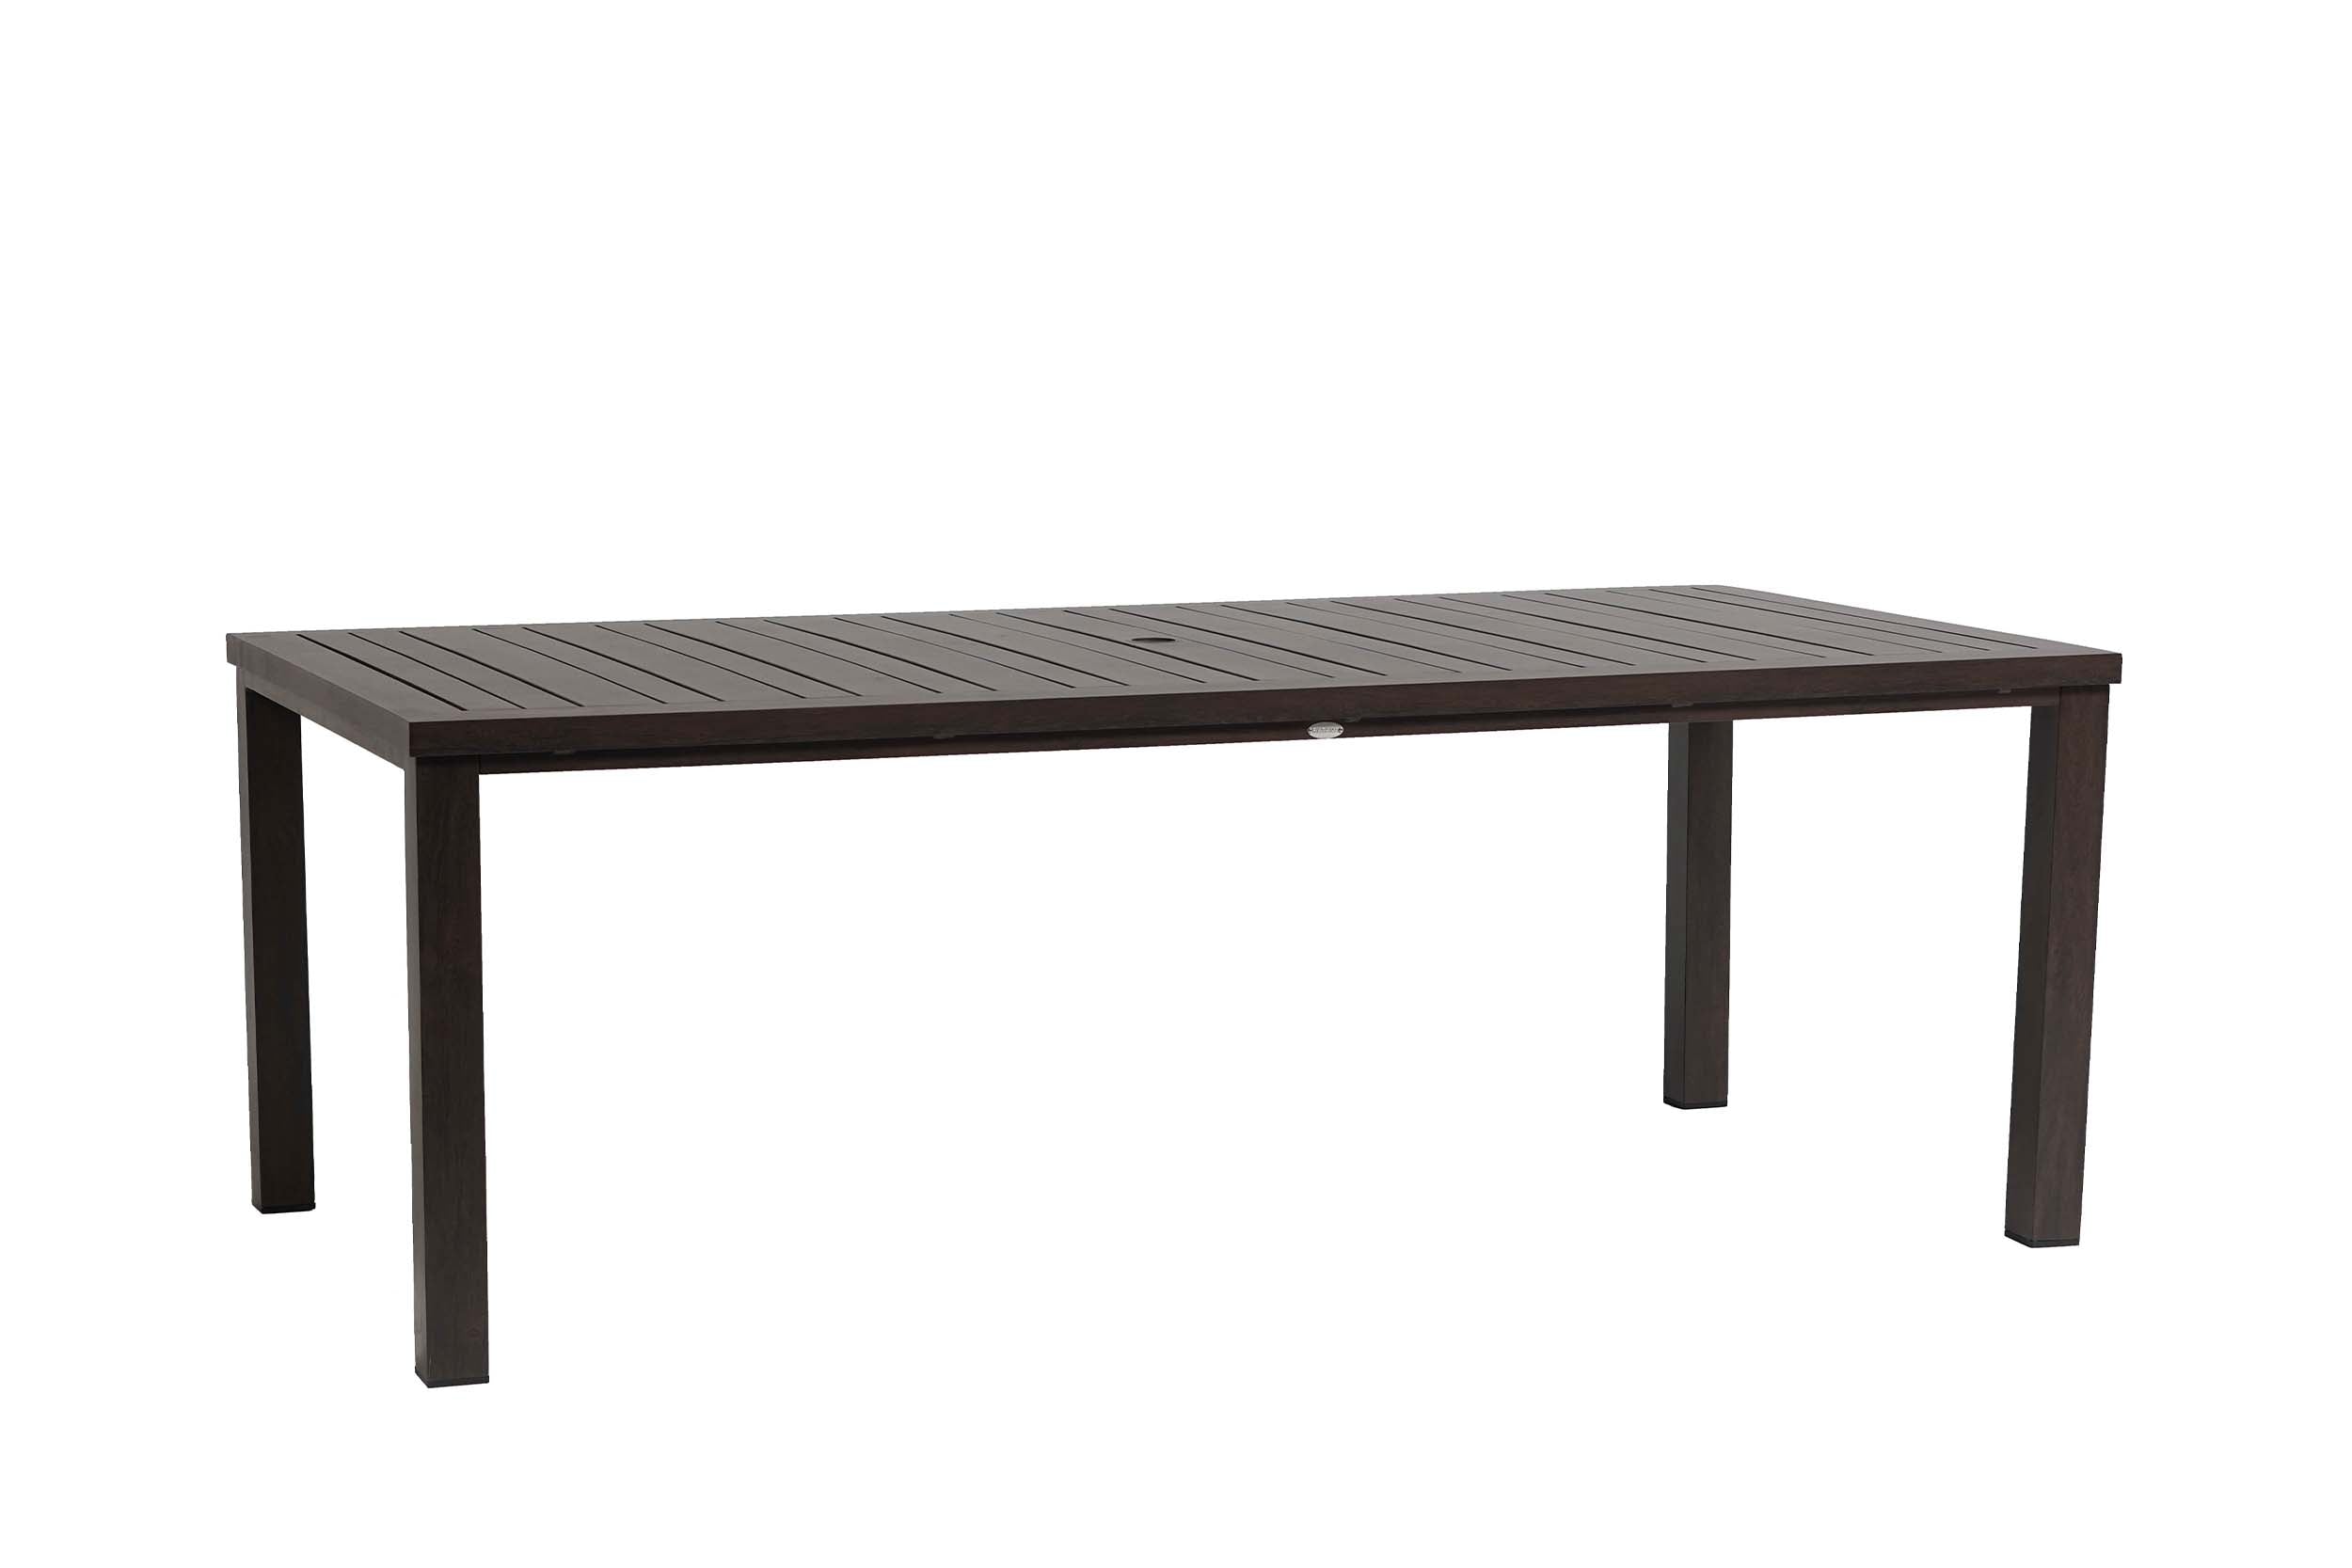 Ratana Canbria 84 inch x 44 inch Rectangle Dining Table in Hessonite Garnet 12041214